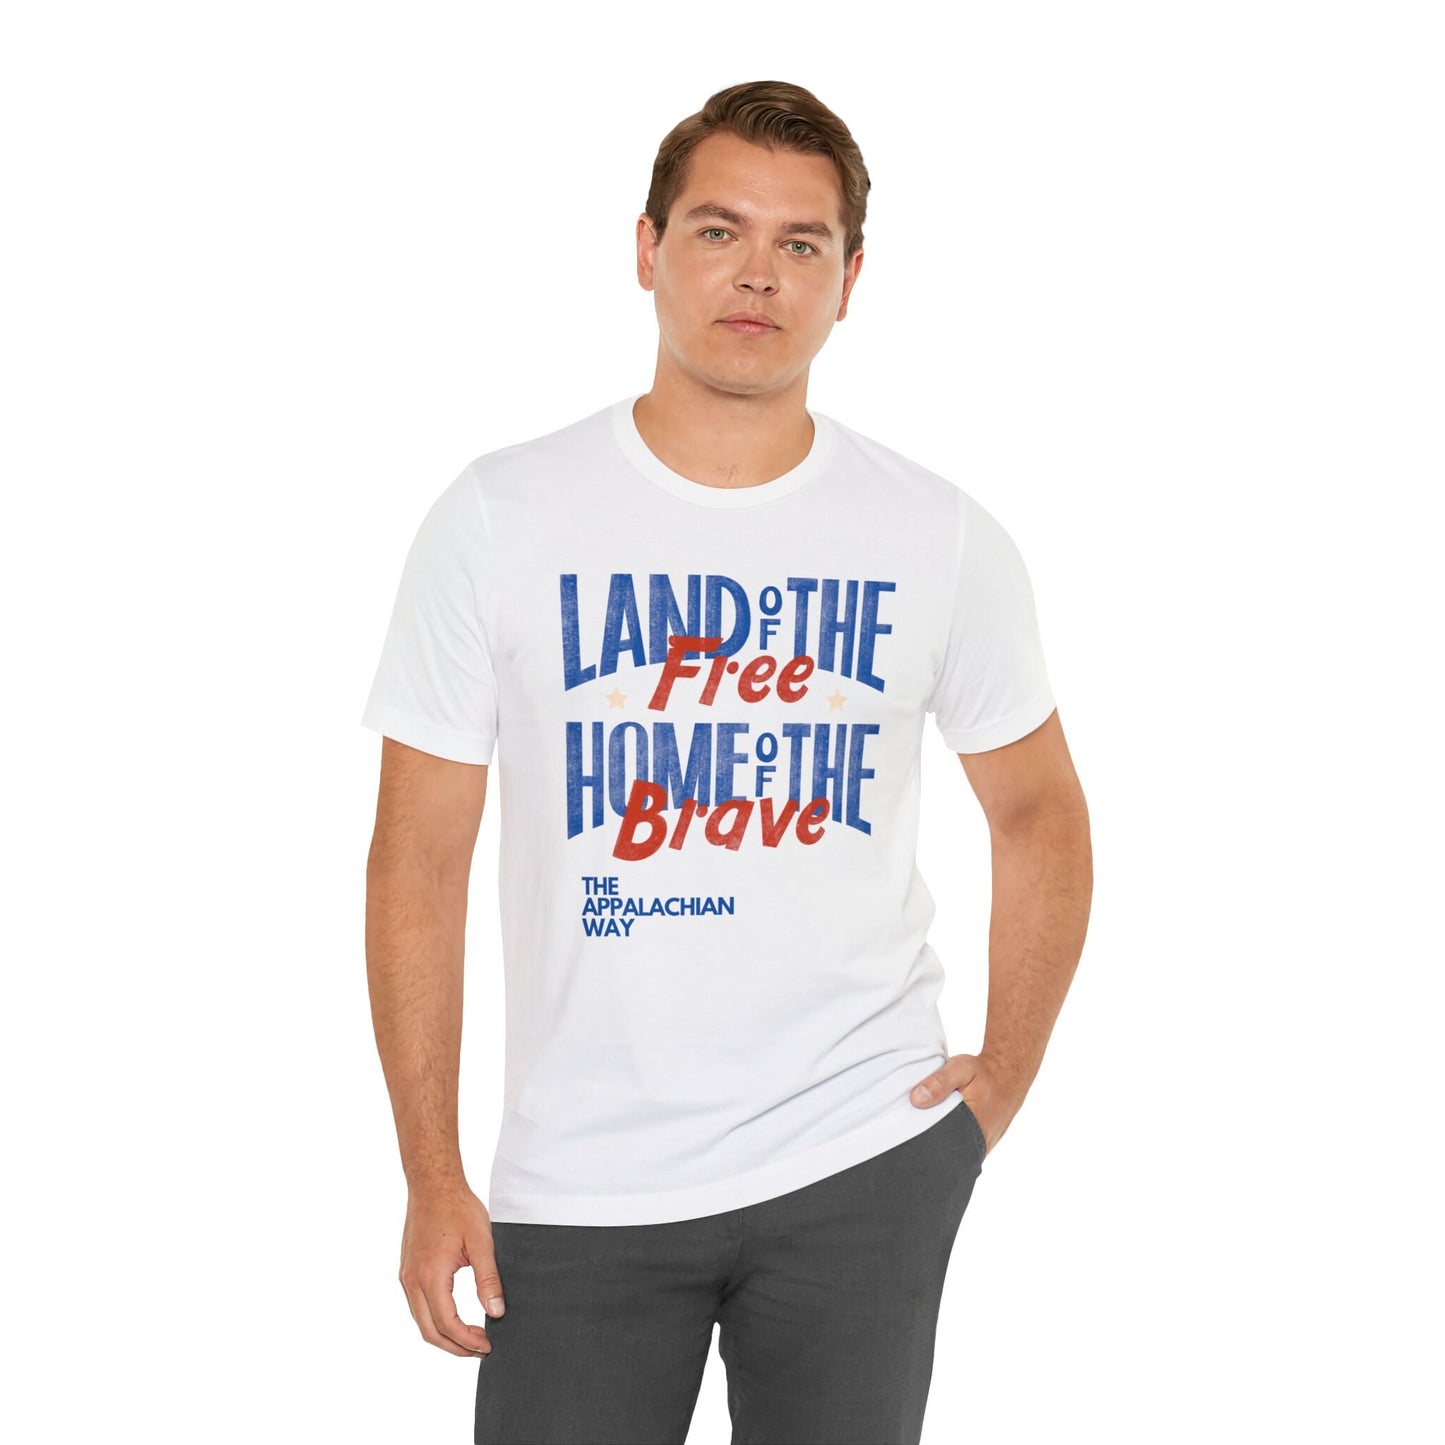 The Appalachian Way Land of the Free Home of the Brave T-shirt